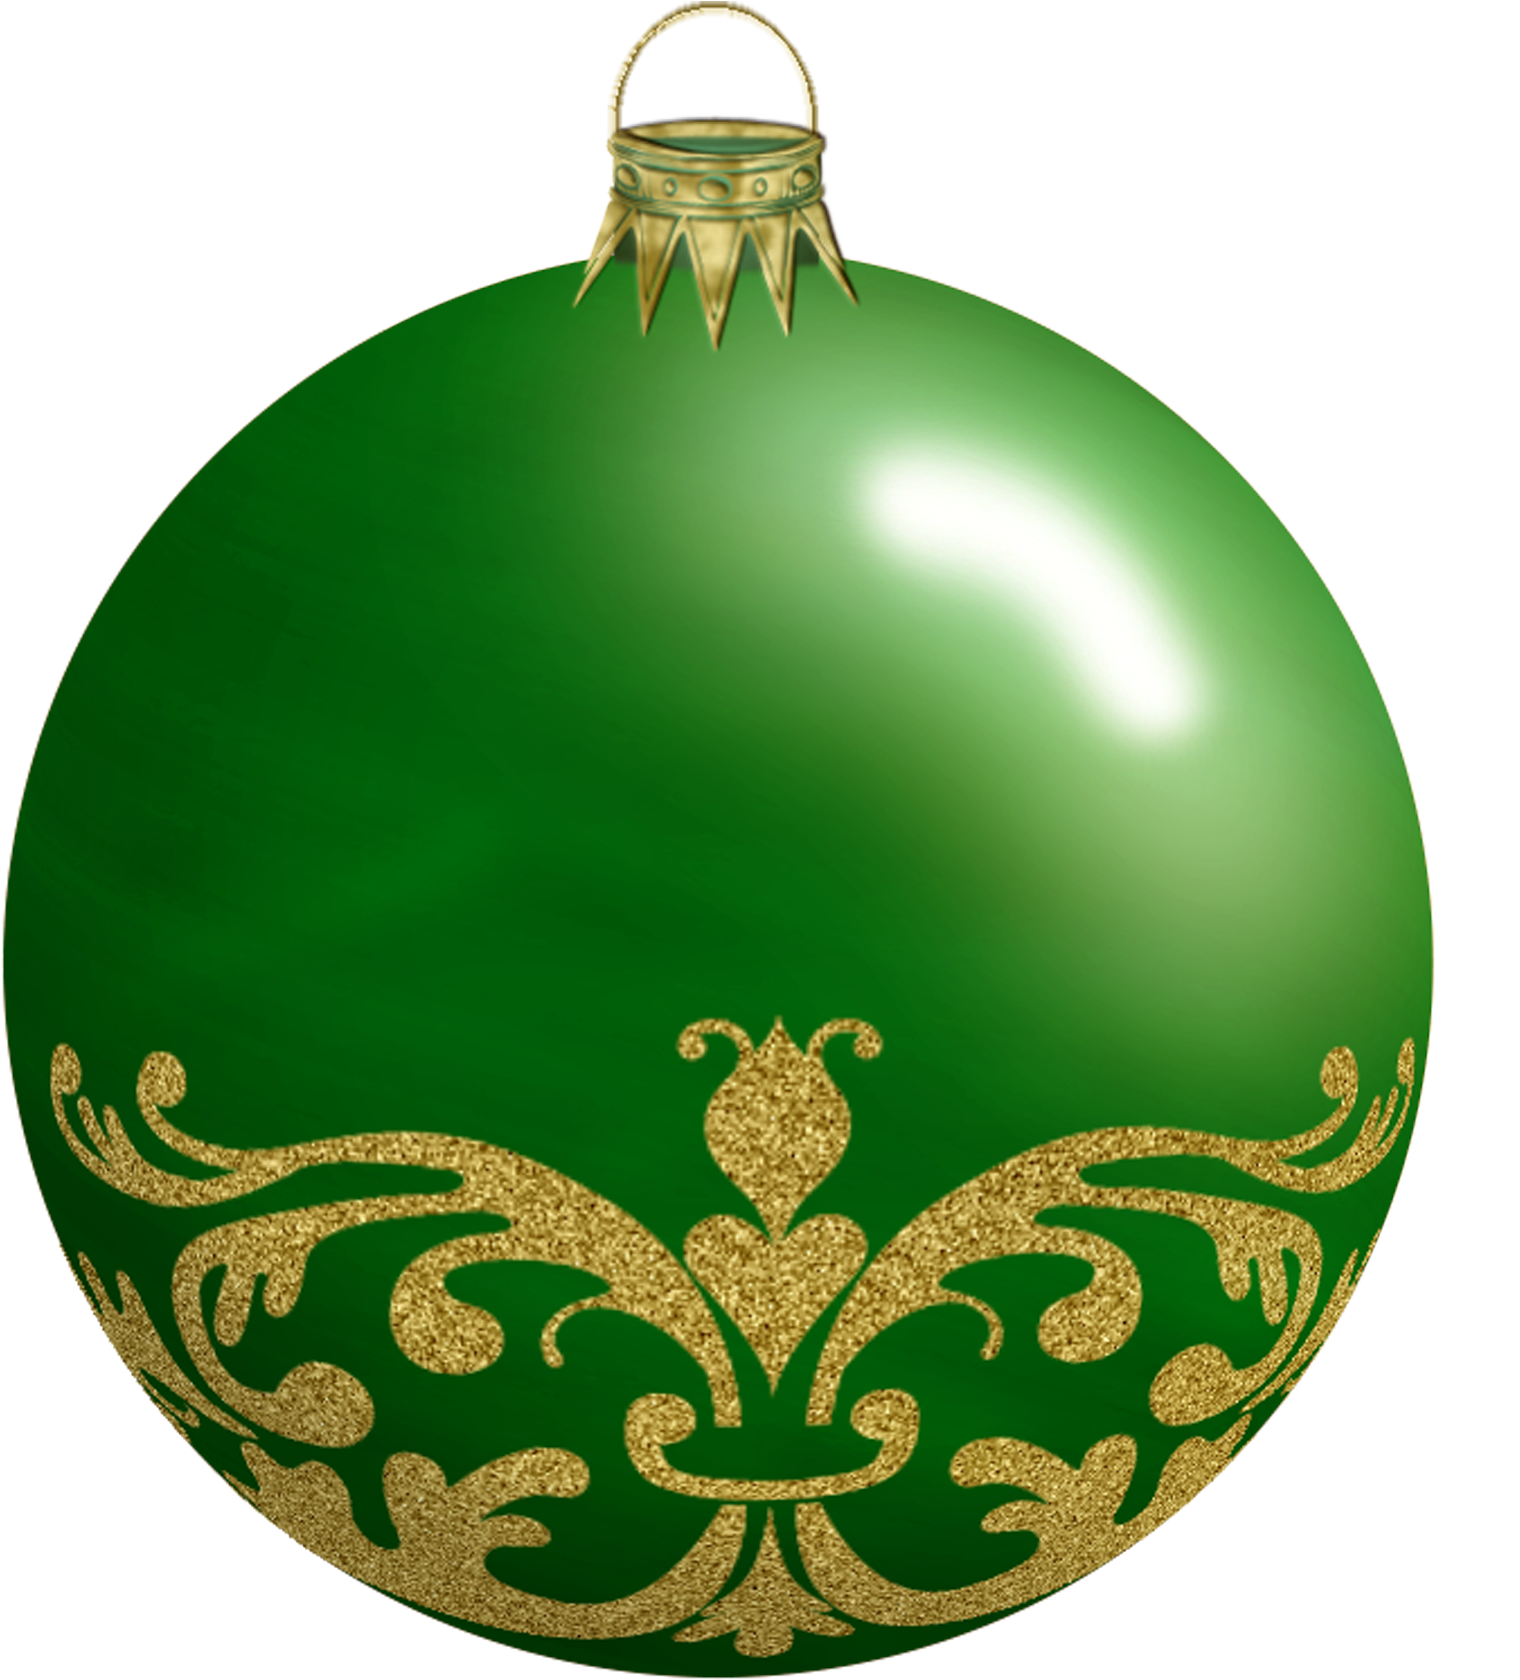 Christmas Ball Png Transparent Image - Christmas Ornament Png Transparent (1602x1797), Png Download